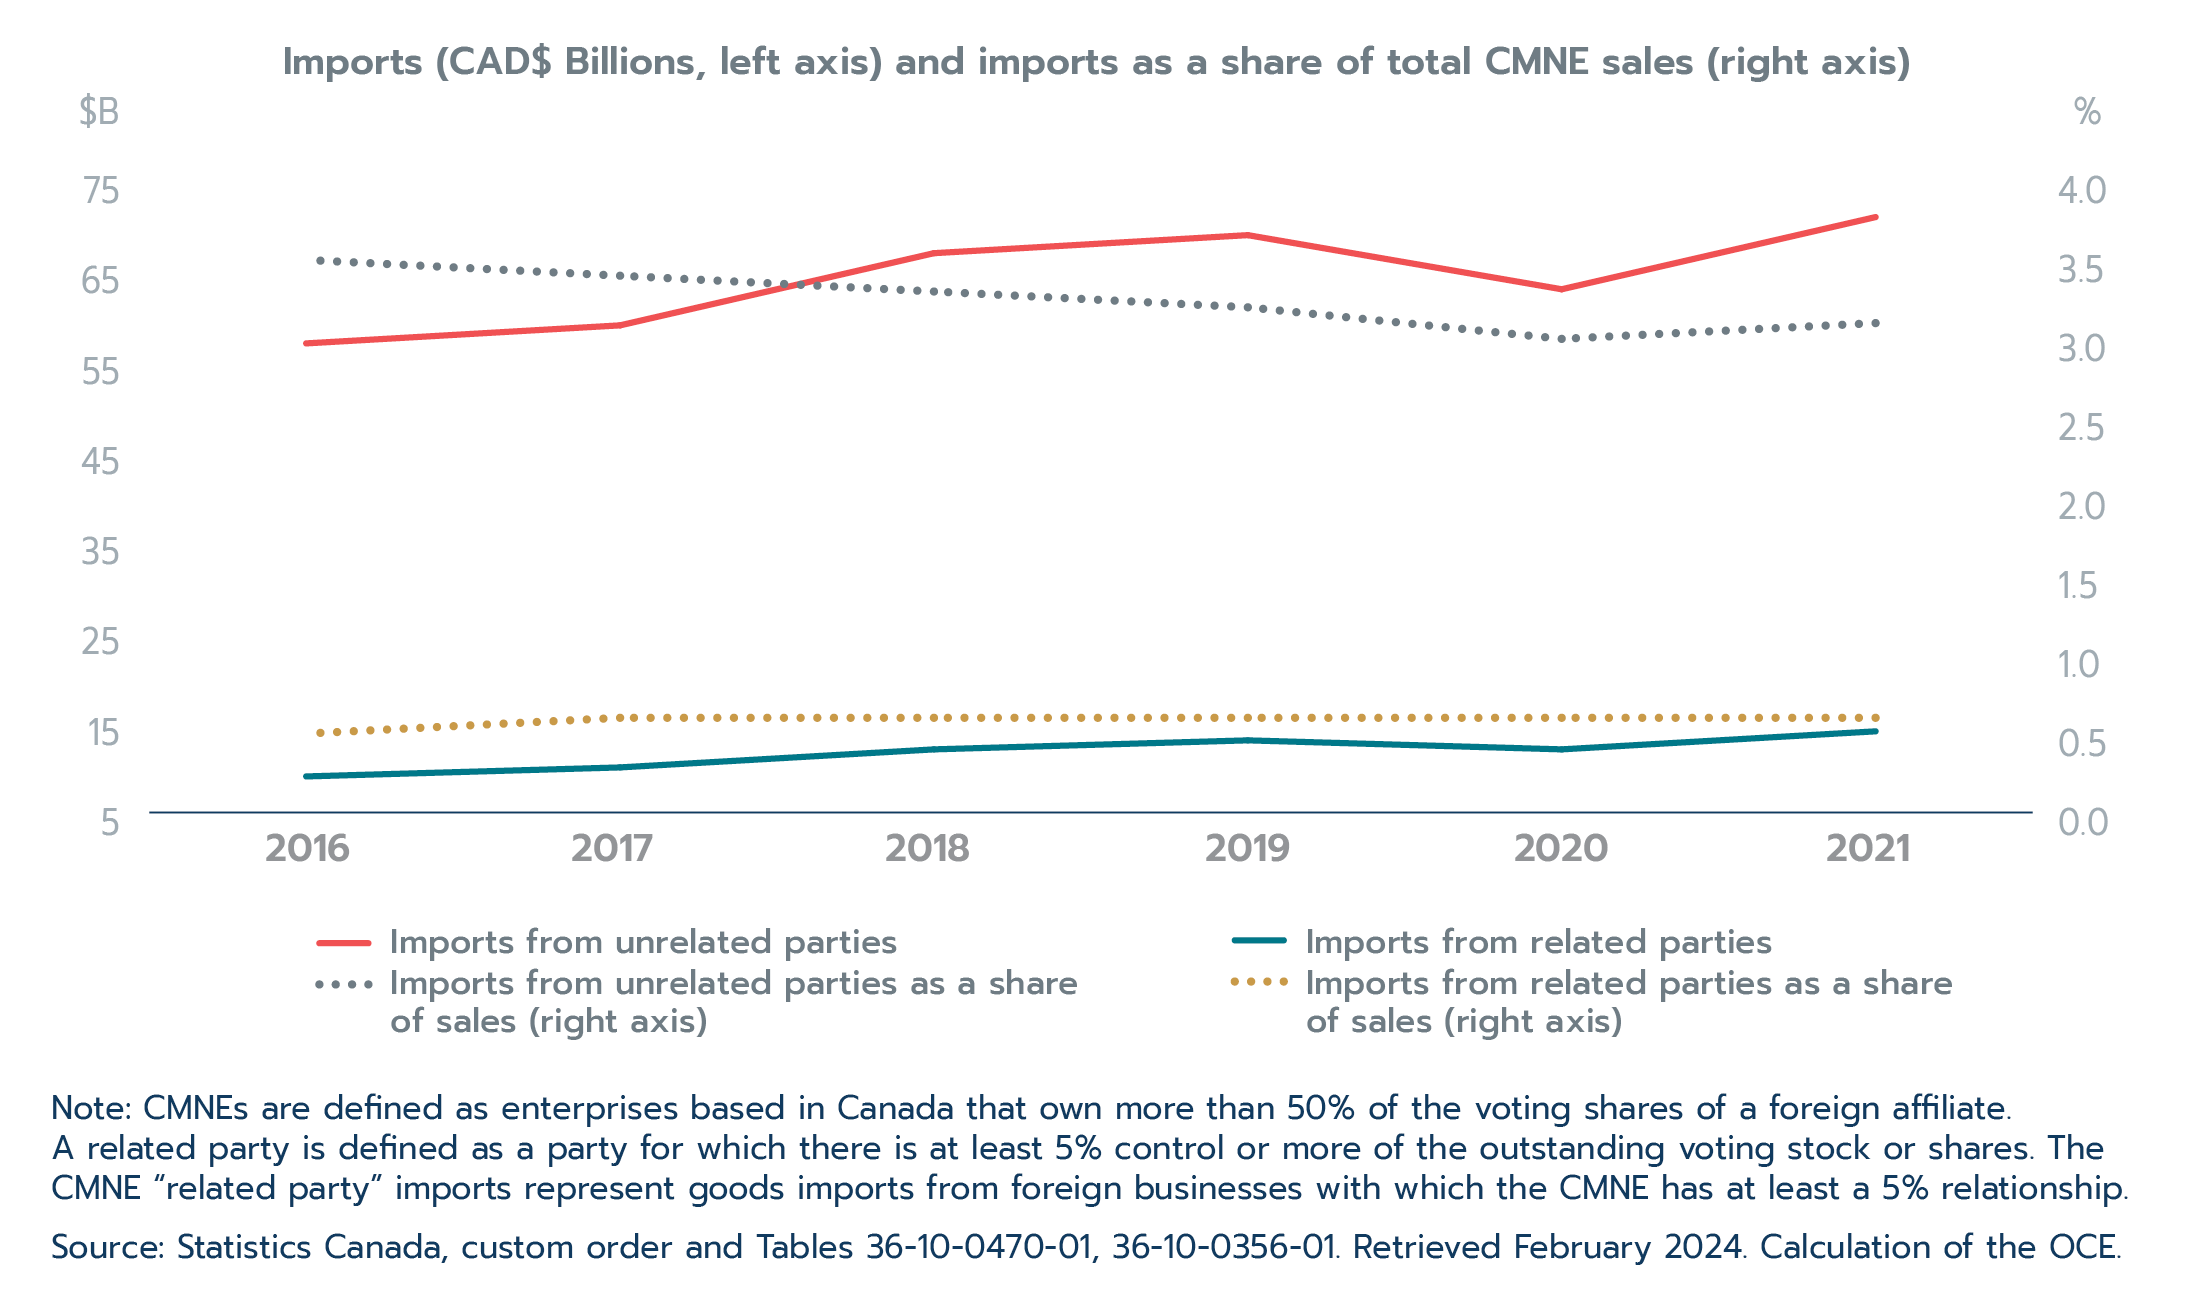 Figure 2.17: The share of CMNE imports from affiliates relative to sales has remained constant